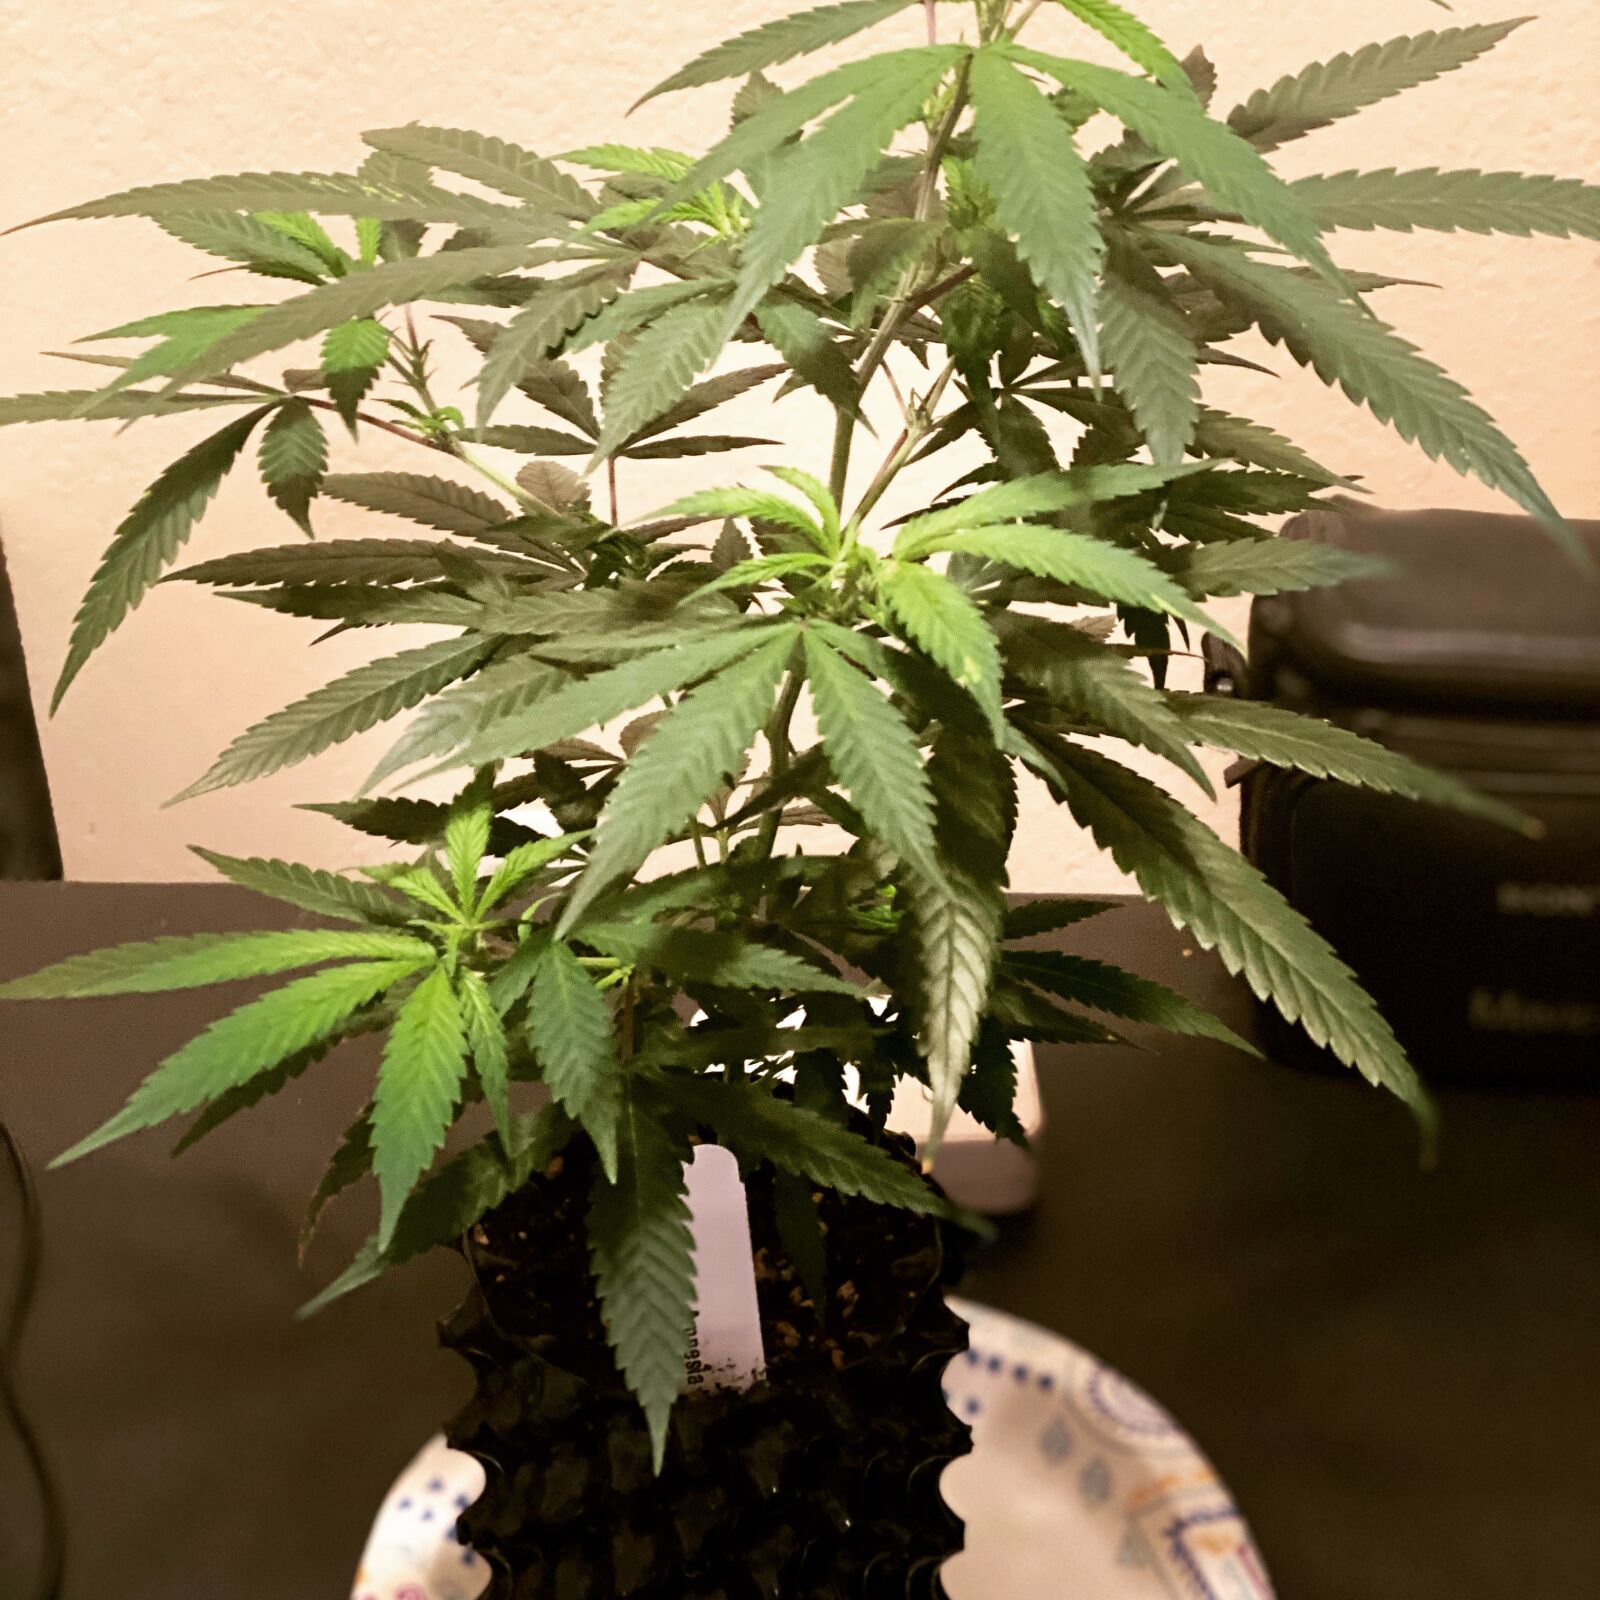 Apple iPhone 11 Pro Max sample photo. Weed, growing, 420 photography